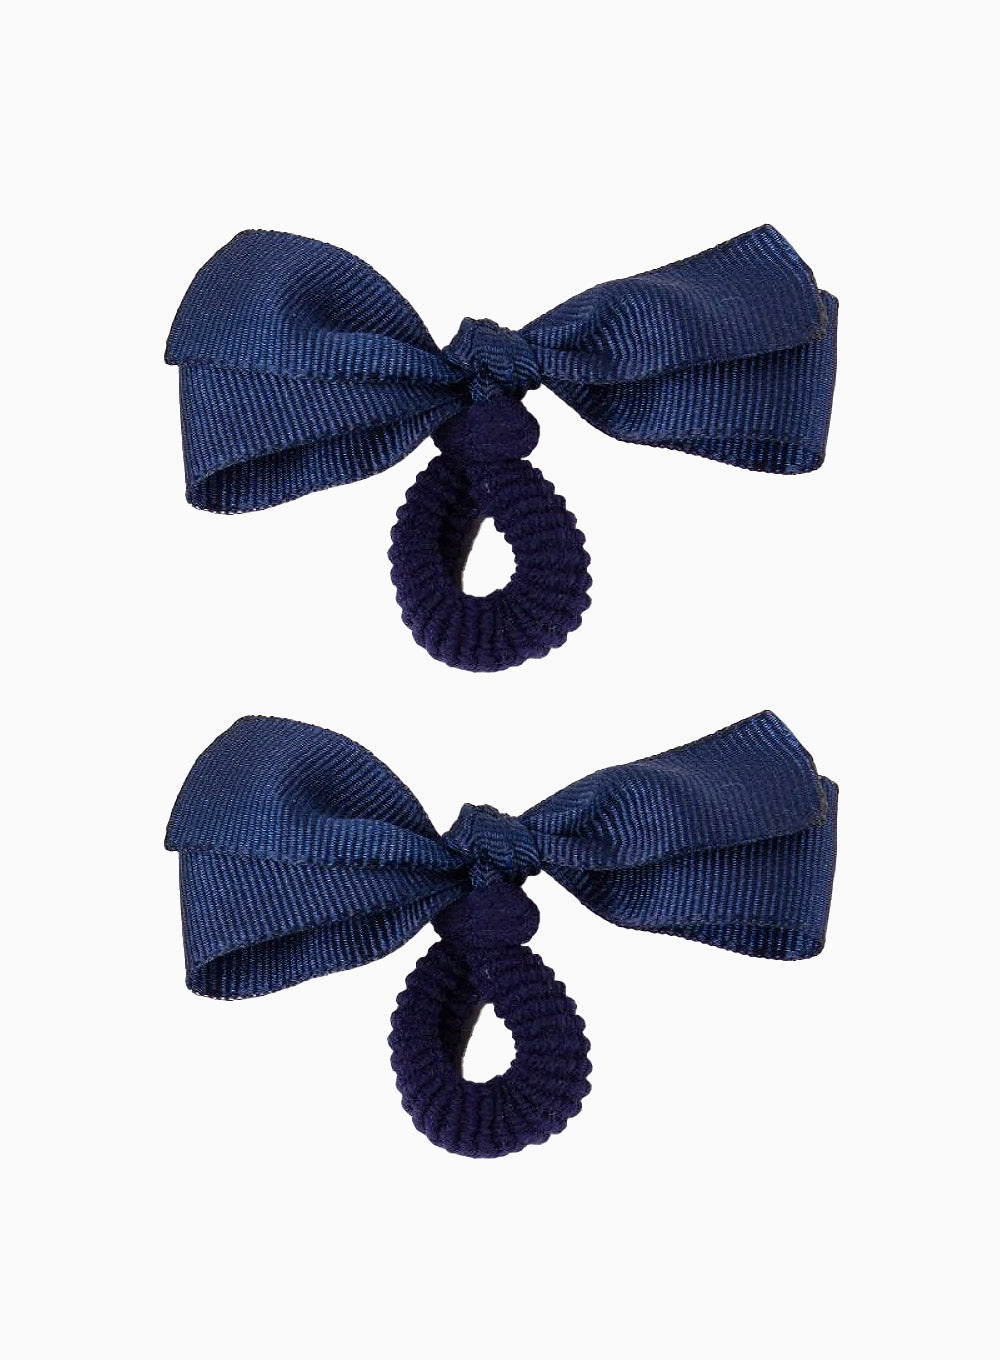 Double Ribbon Bow - Light Blue/ Navy with Bottle Cap